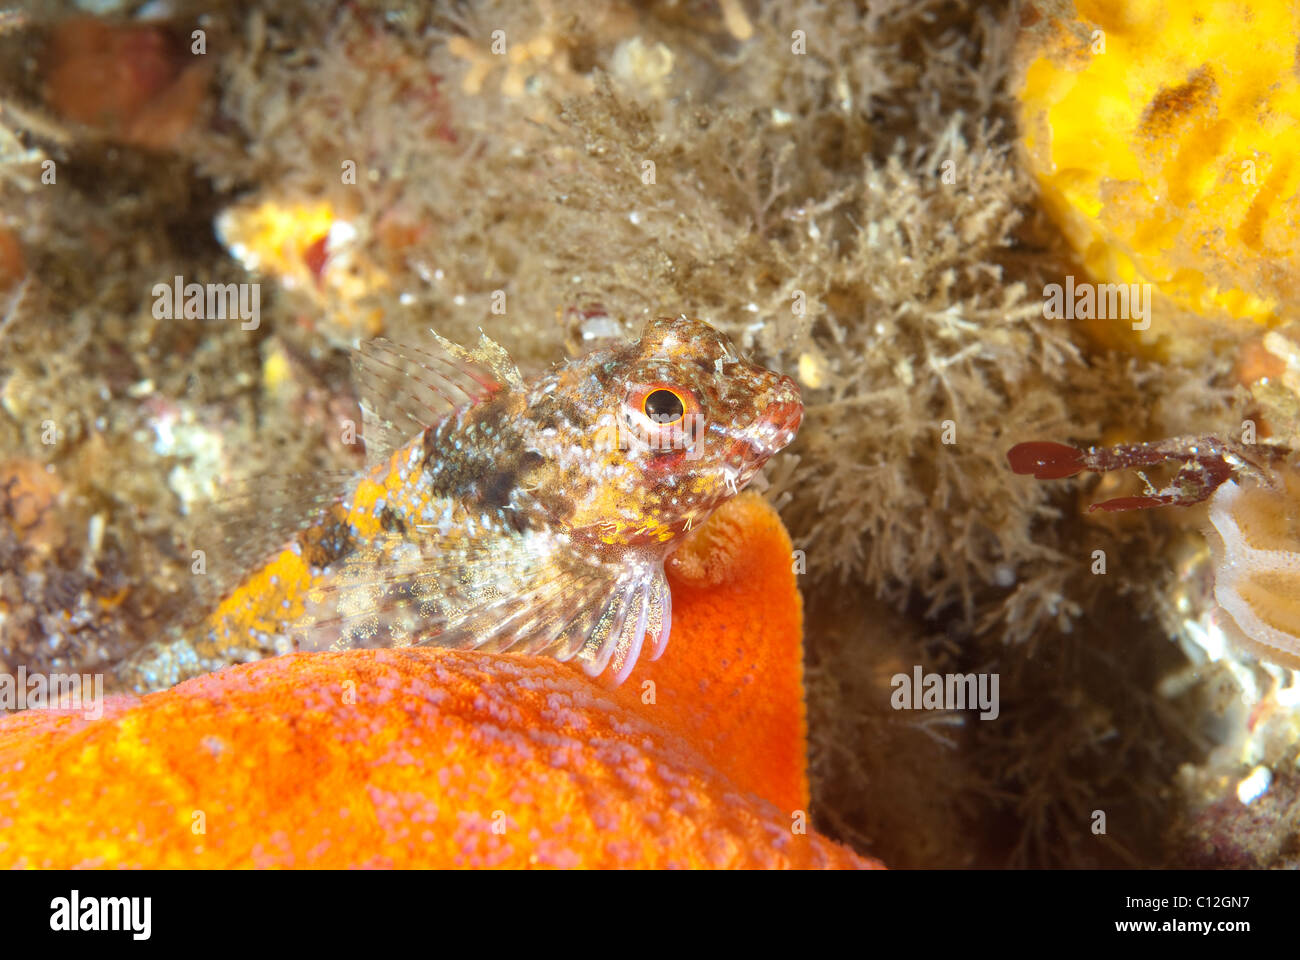 A beautiful underwater reef fish rests on top of an orange starfish Stock Photo